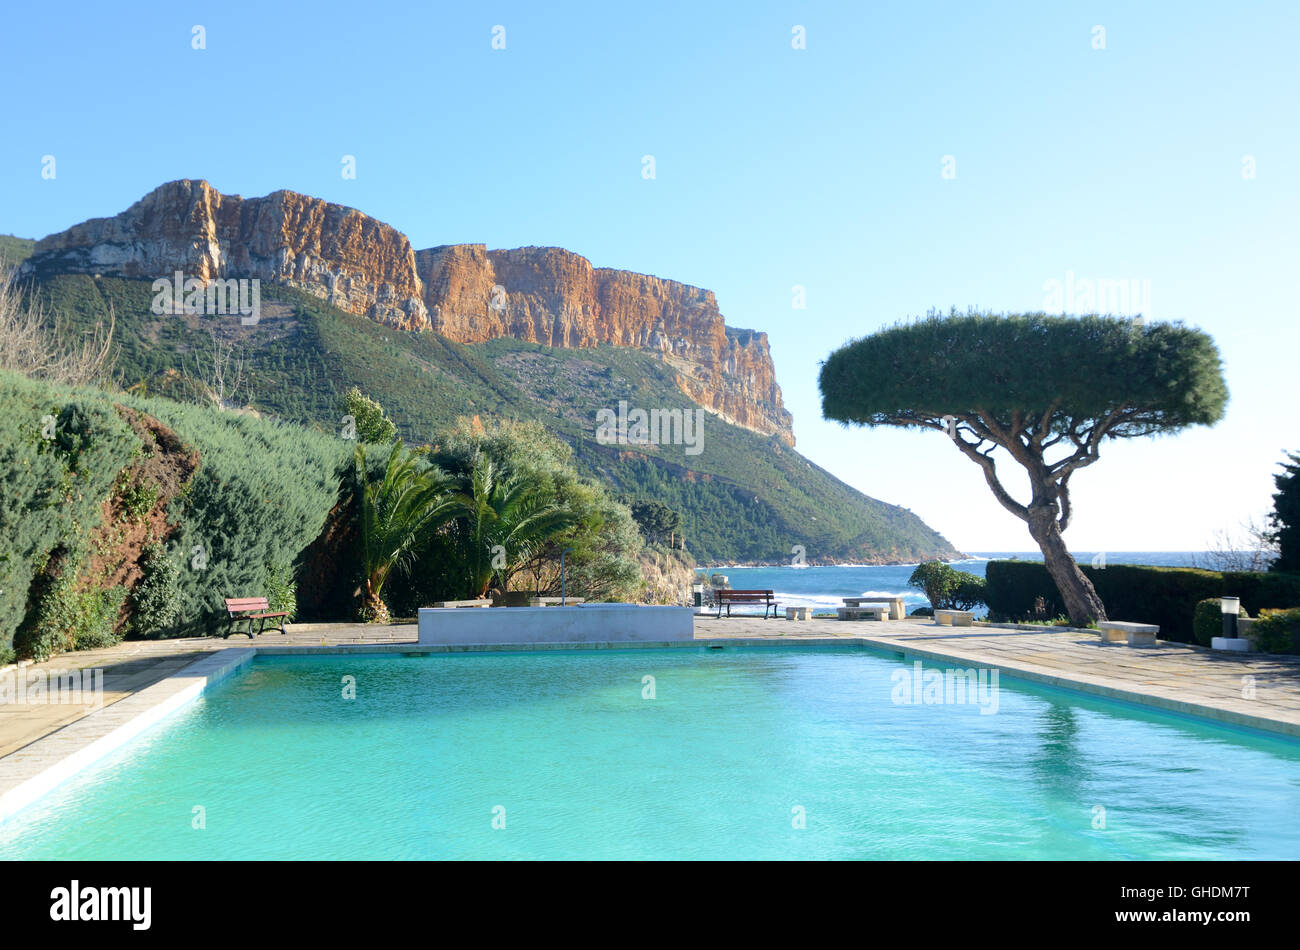 Cap Canaille Headland Cassis Sea Cliffs Swimming Pool and Umbrella Pine, Mediterranean Coast, Cassis, Provence, France Stock Photo